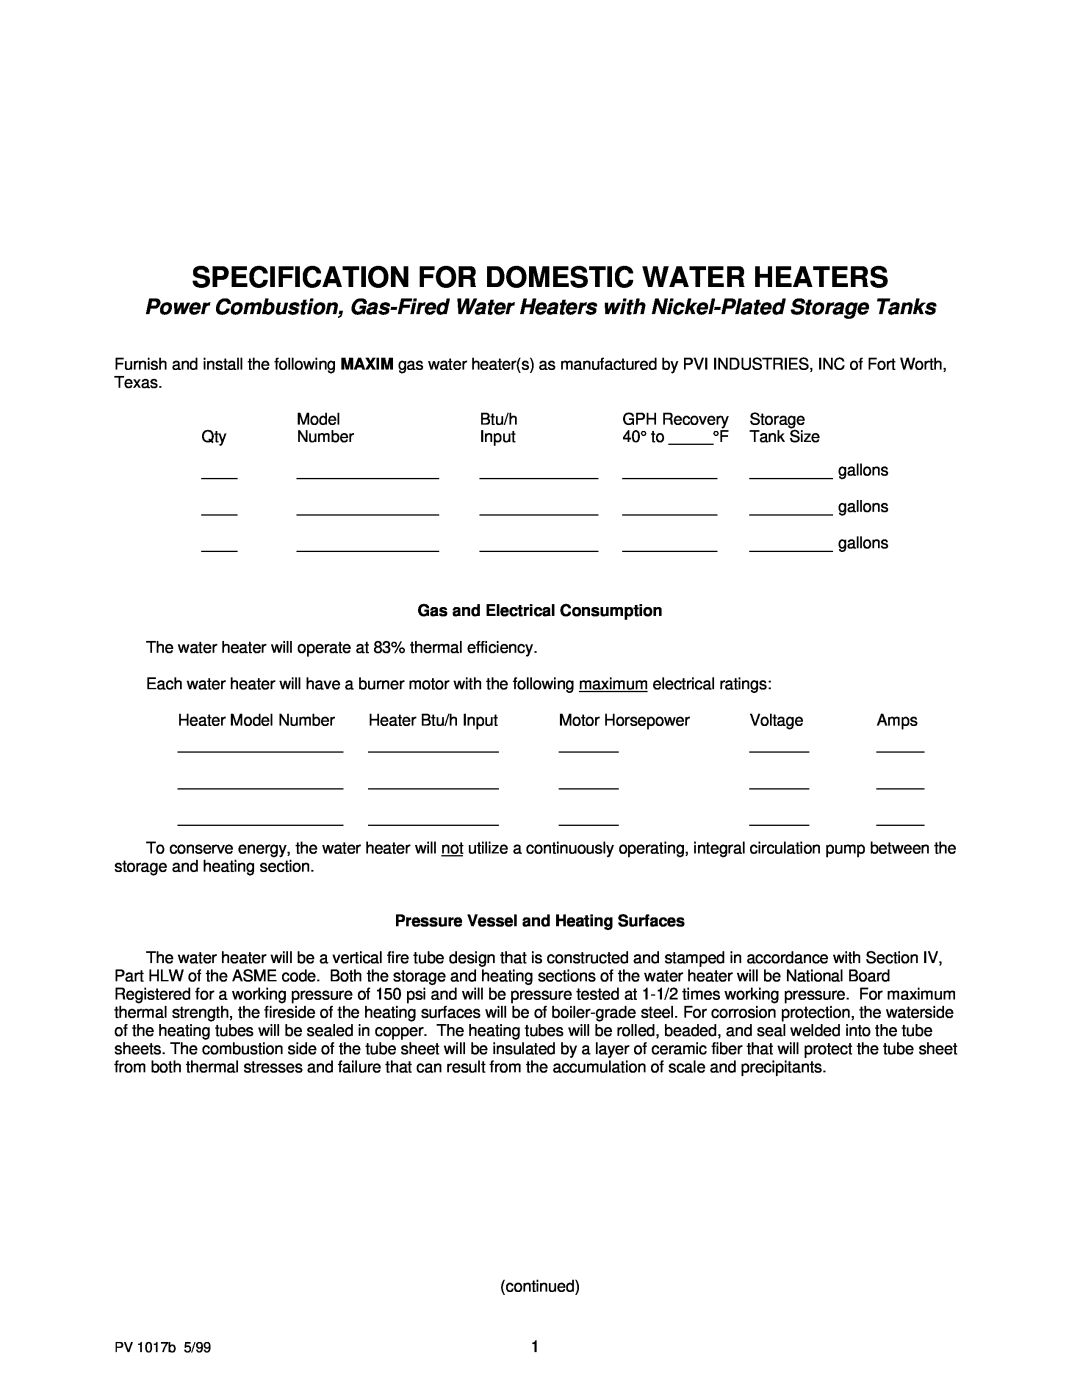 PVI Industries manual Specification For Domestic Water Heaters 